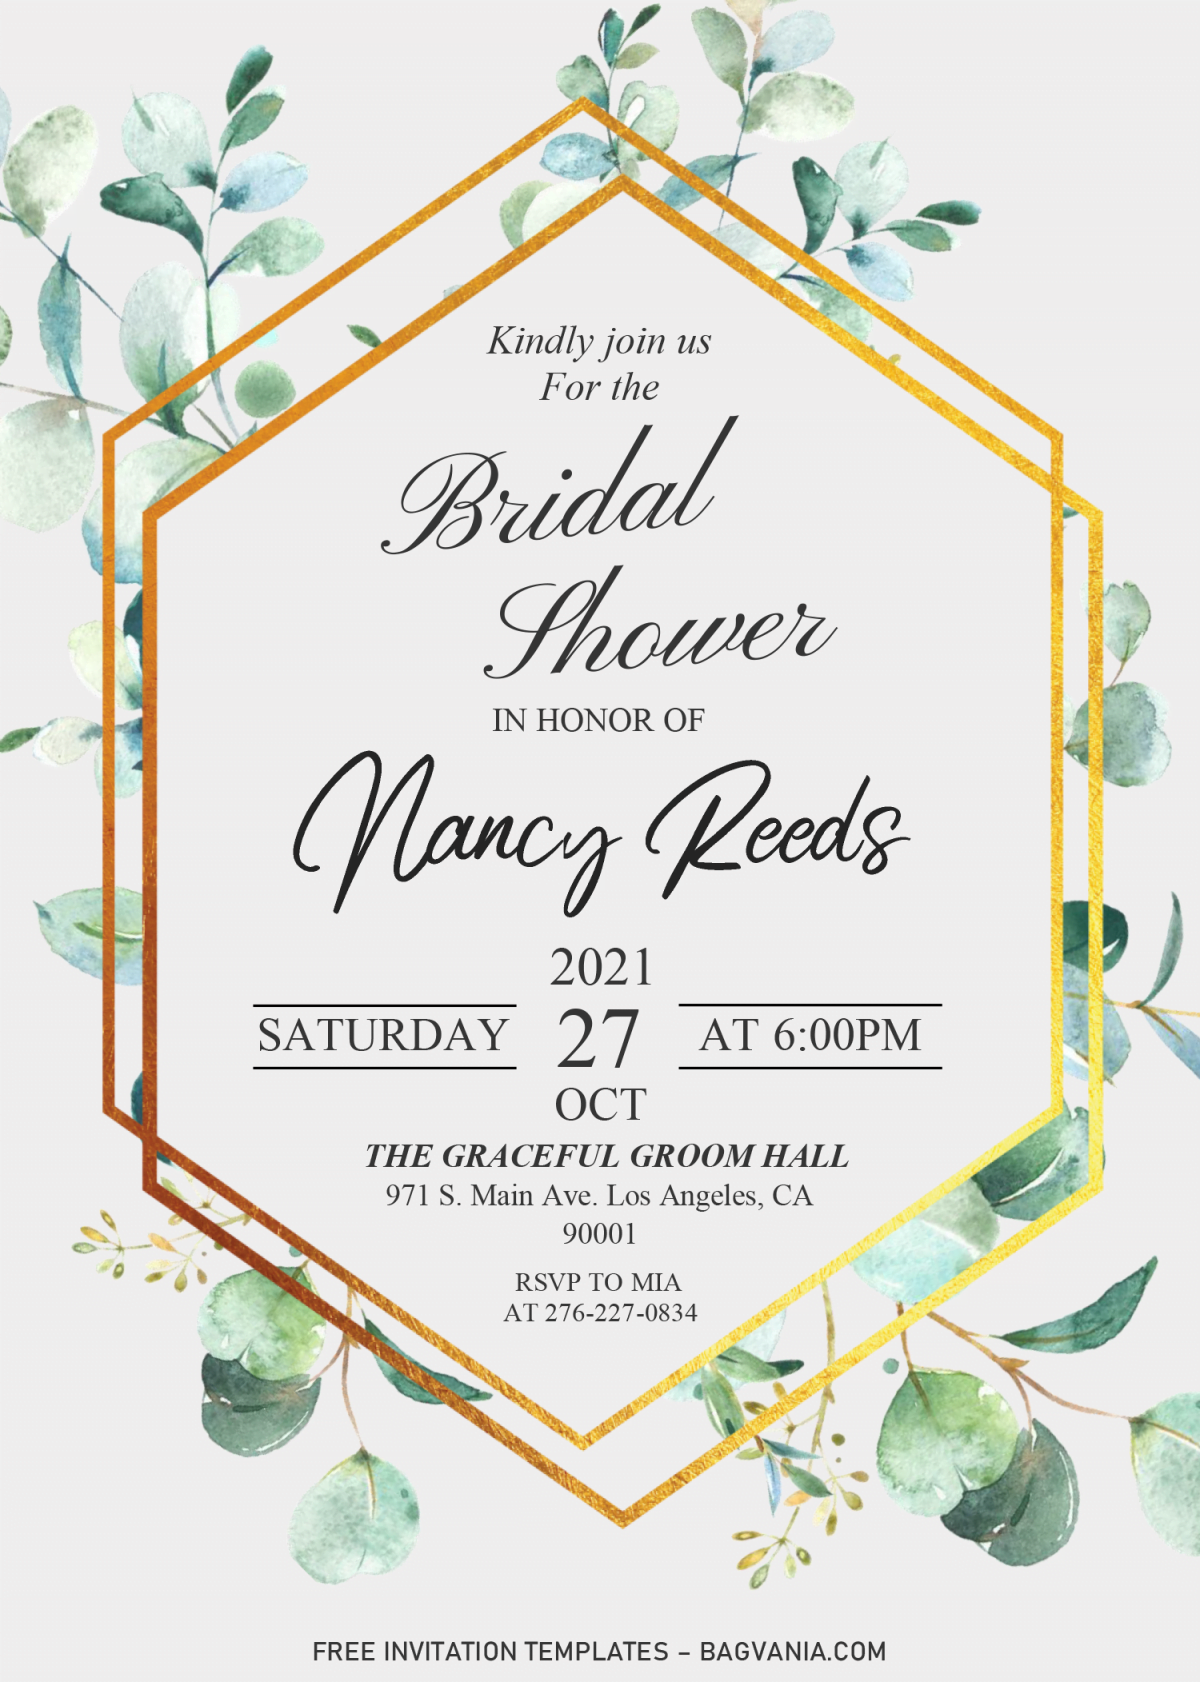 Modern Floral Invitation Templates - Editable .DOCX and has white background